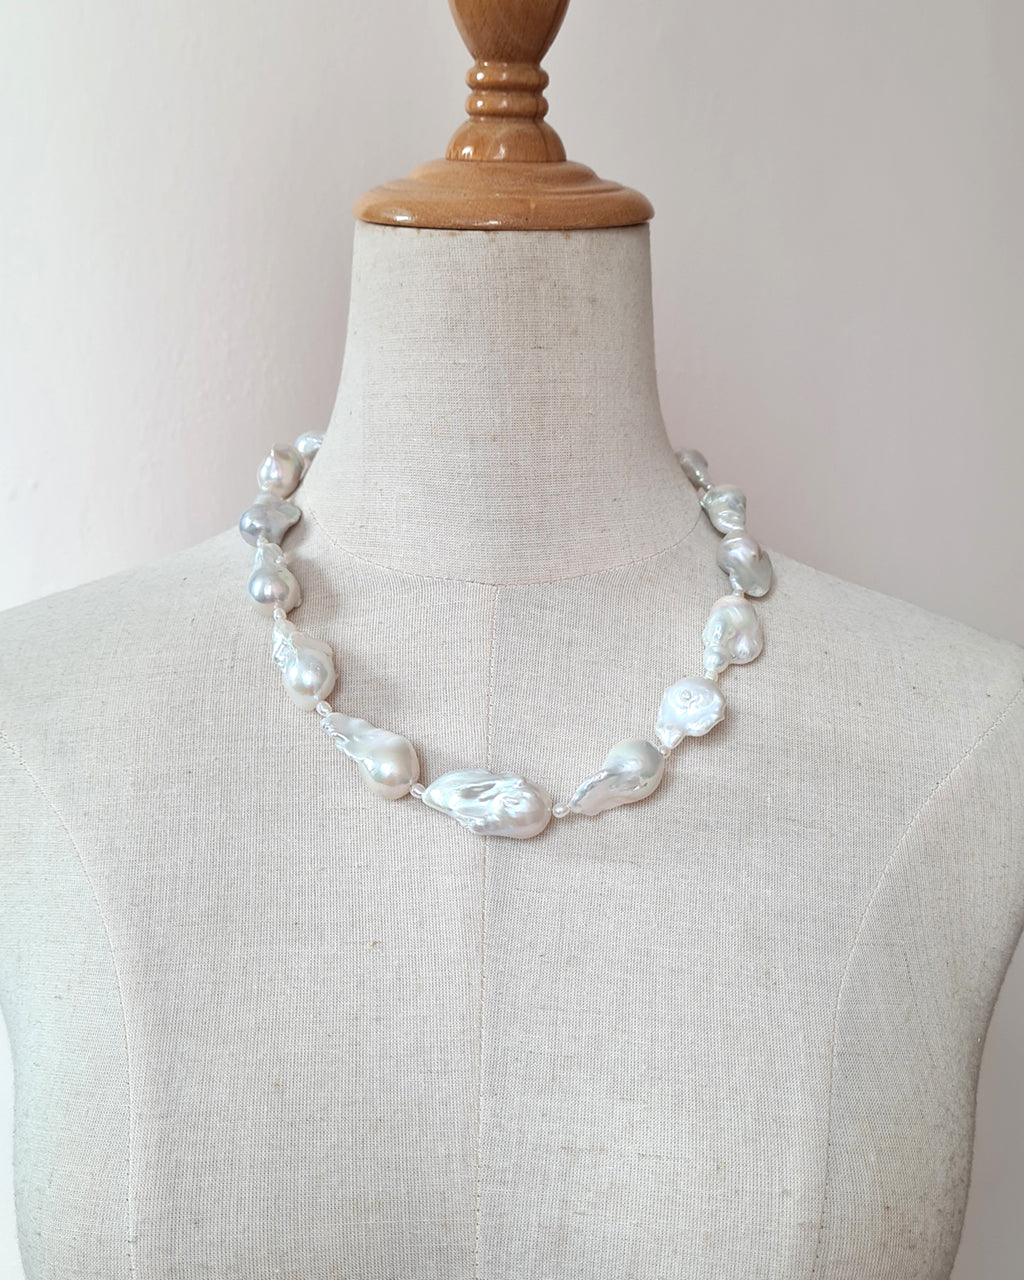 Timeless White Baroque Freshwater Pearl Necklace - Big Baroque Strand Pearl Jewelry